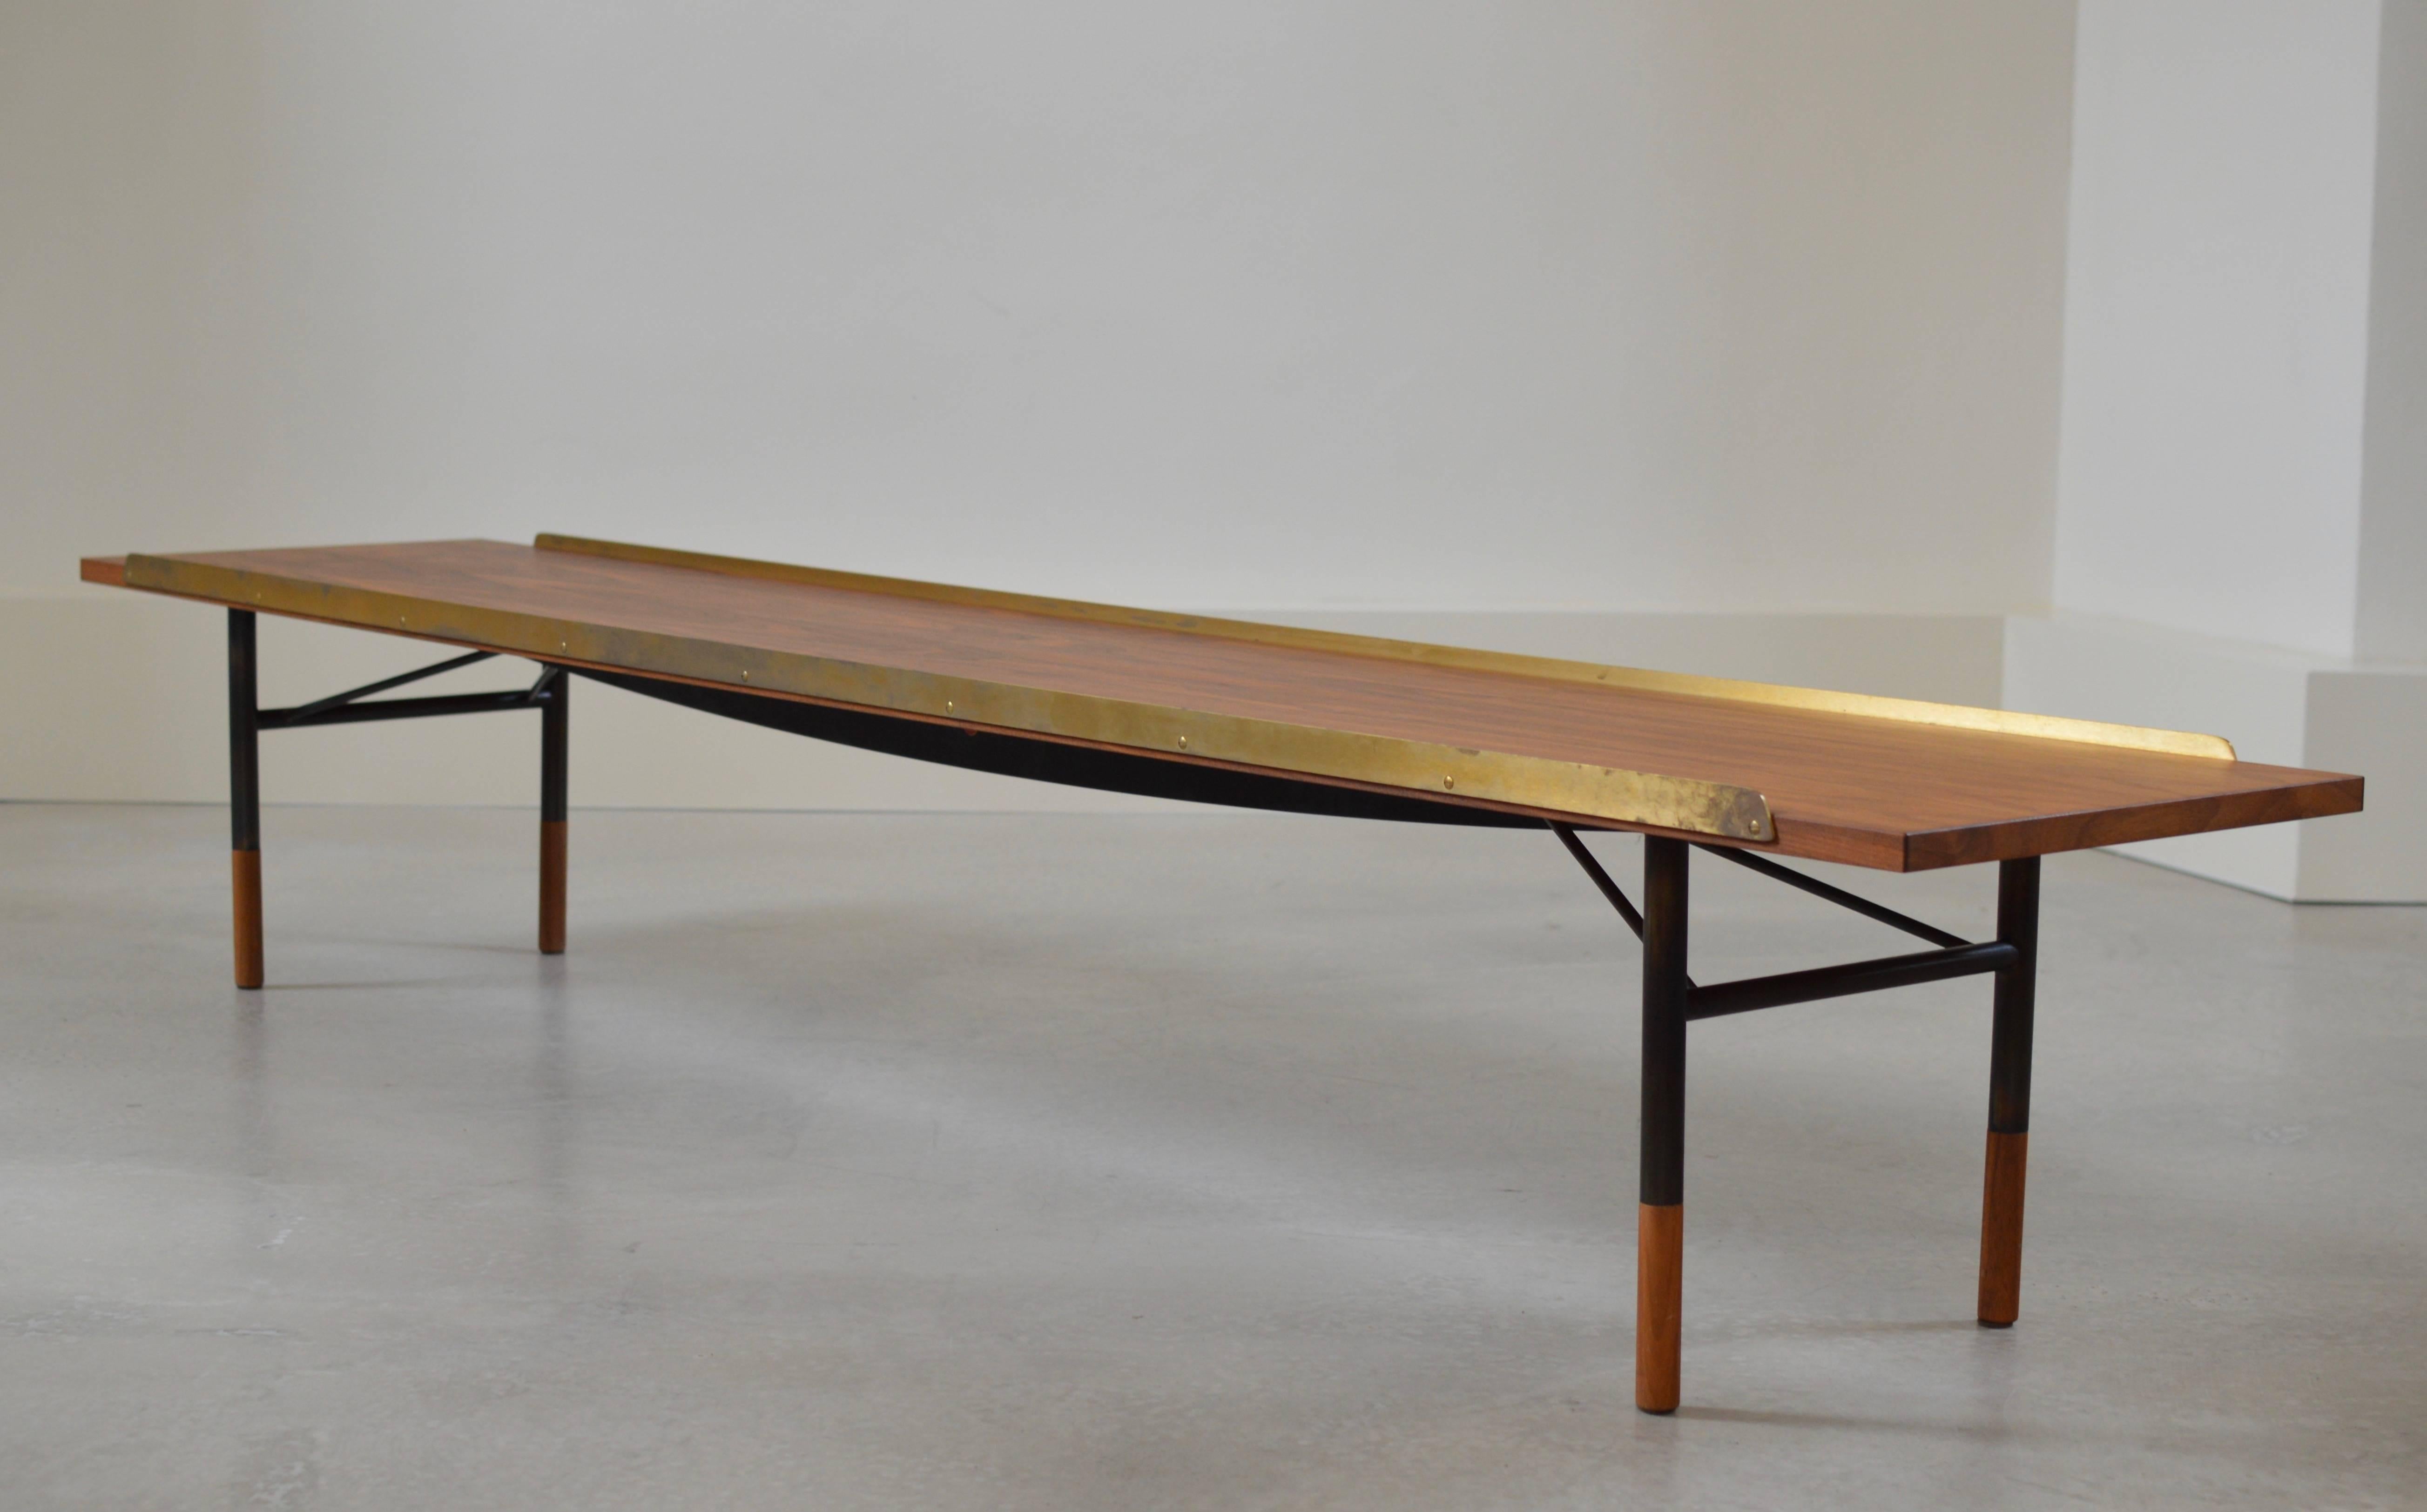 Bench in walnut and brass with burnished steel framework with wooden toes. Originally drawn in 1954 by Finn Juhl and executed by Bovirke. This bench is one of the very first benches manufactured in 2012 by sole license holder One Collection who then